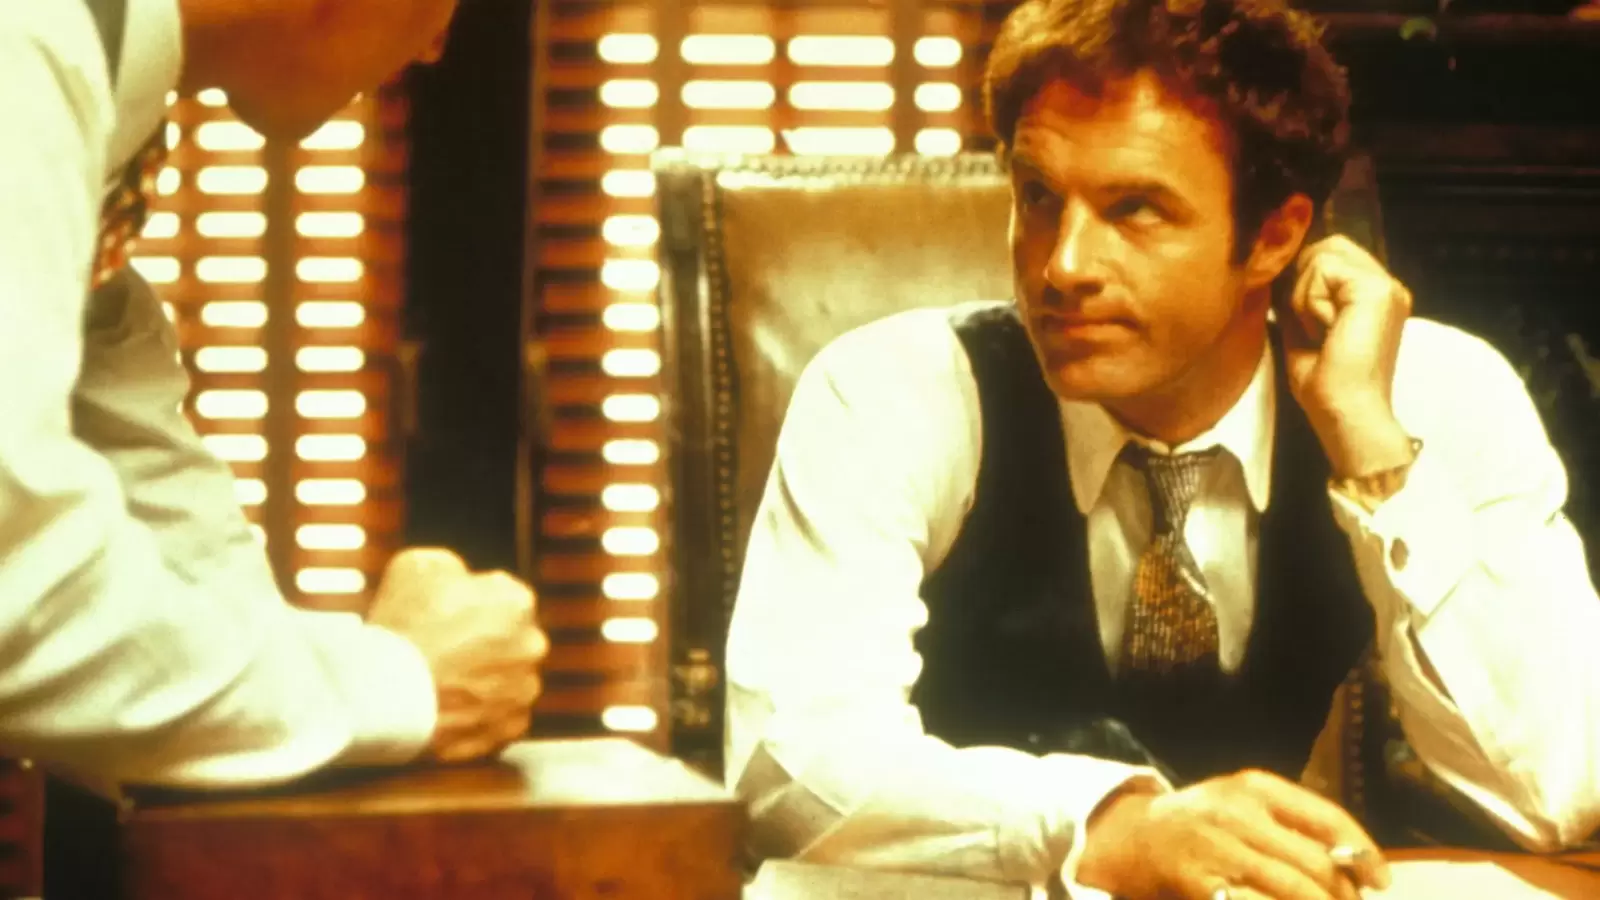 James Caan, best known for playing Sonny Corleone in The Godfather, dies at 82